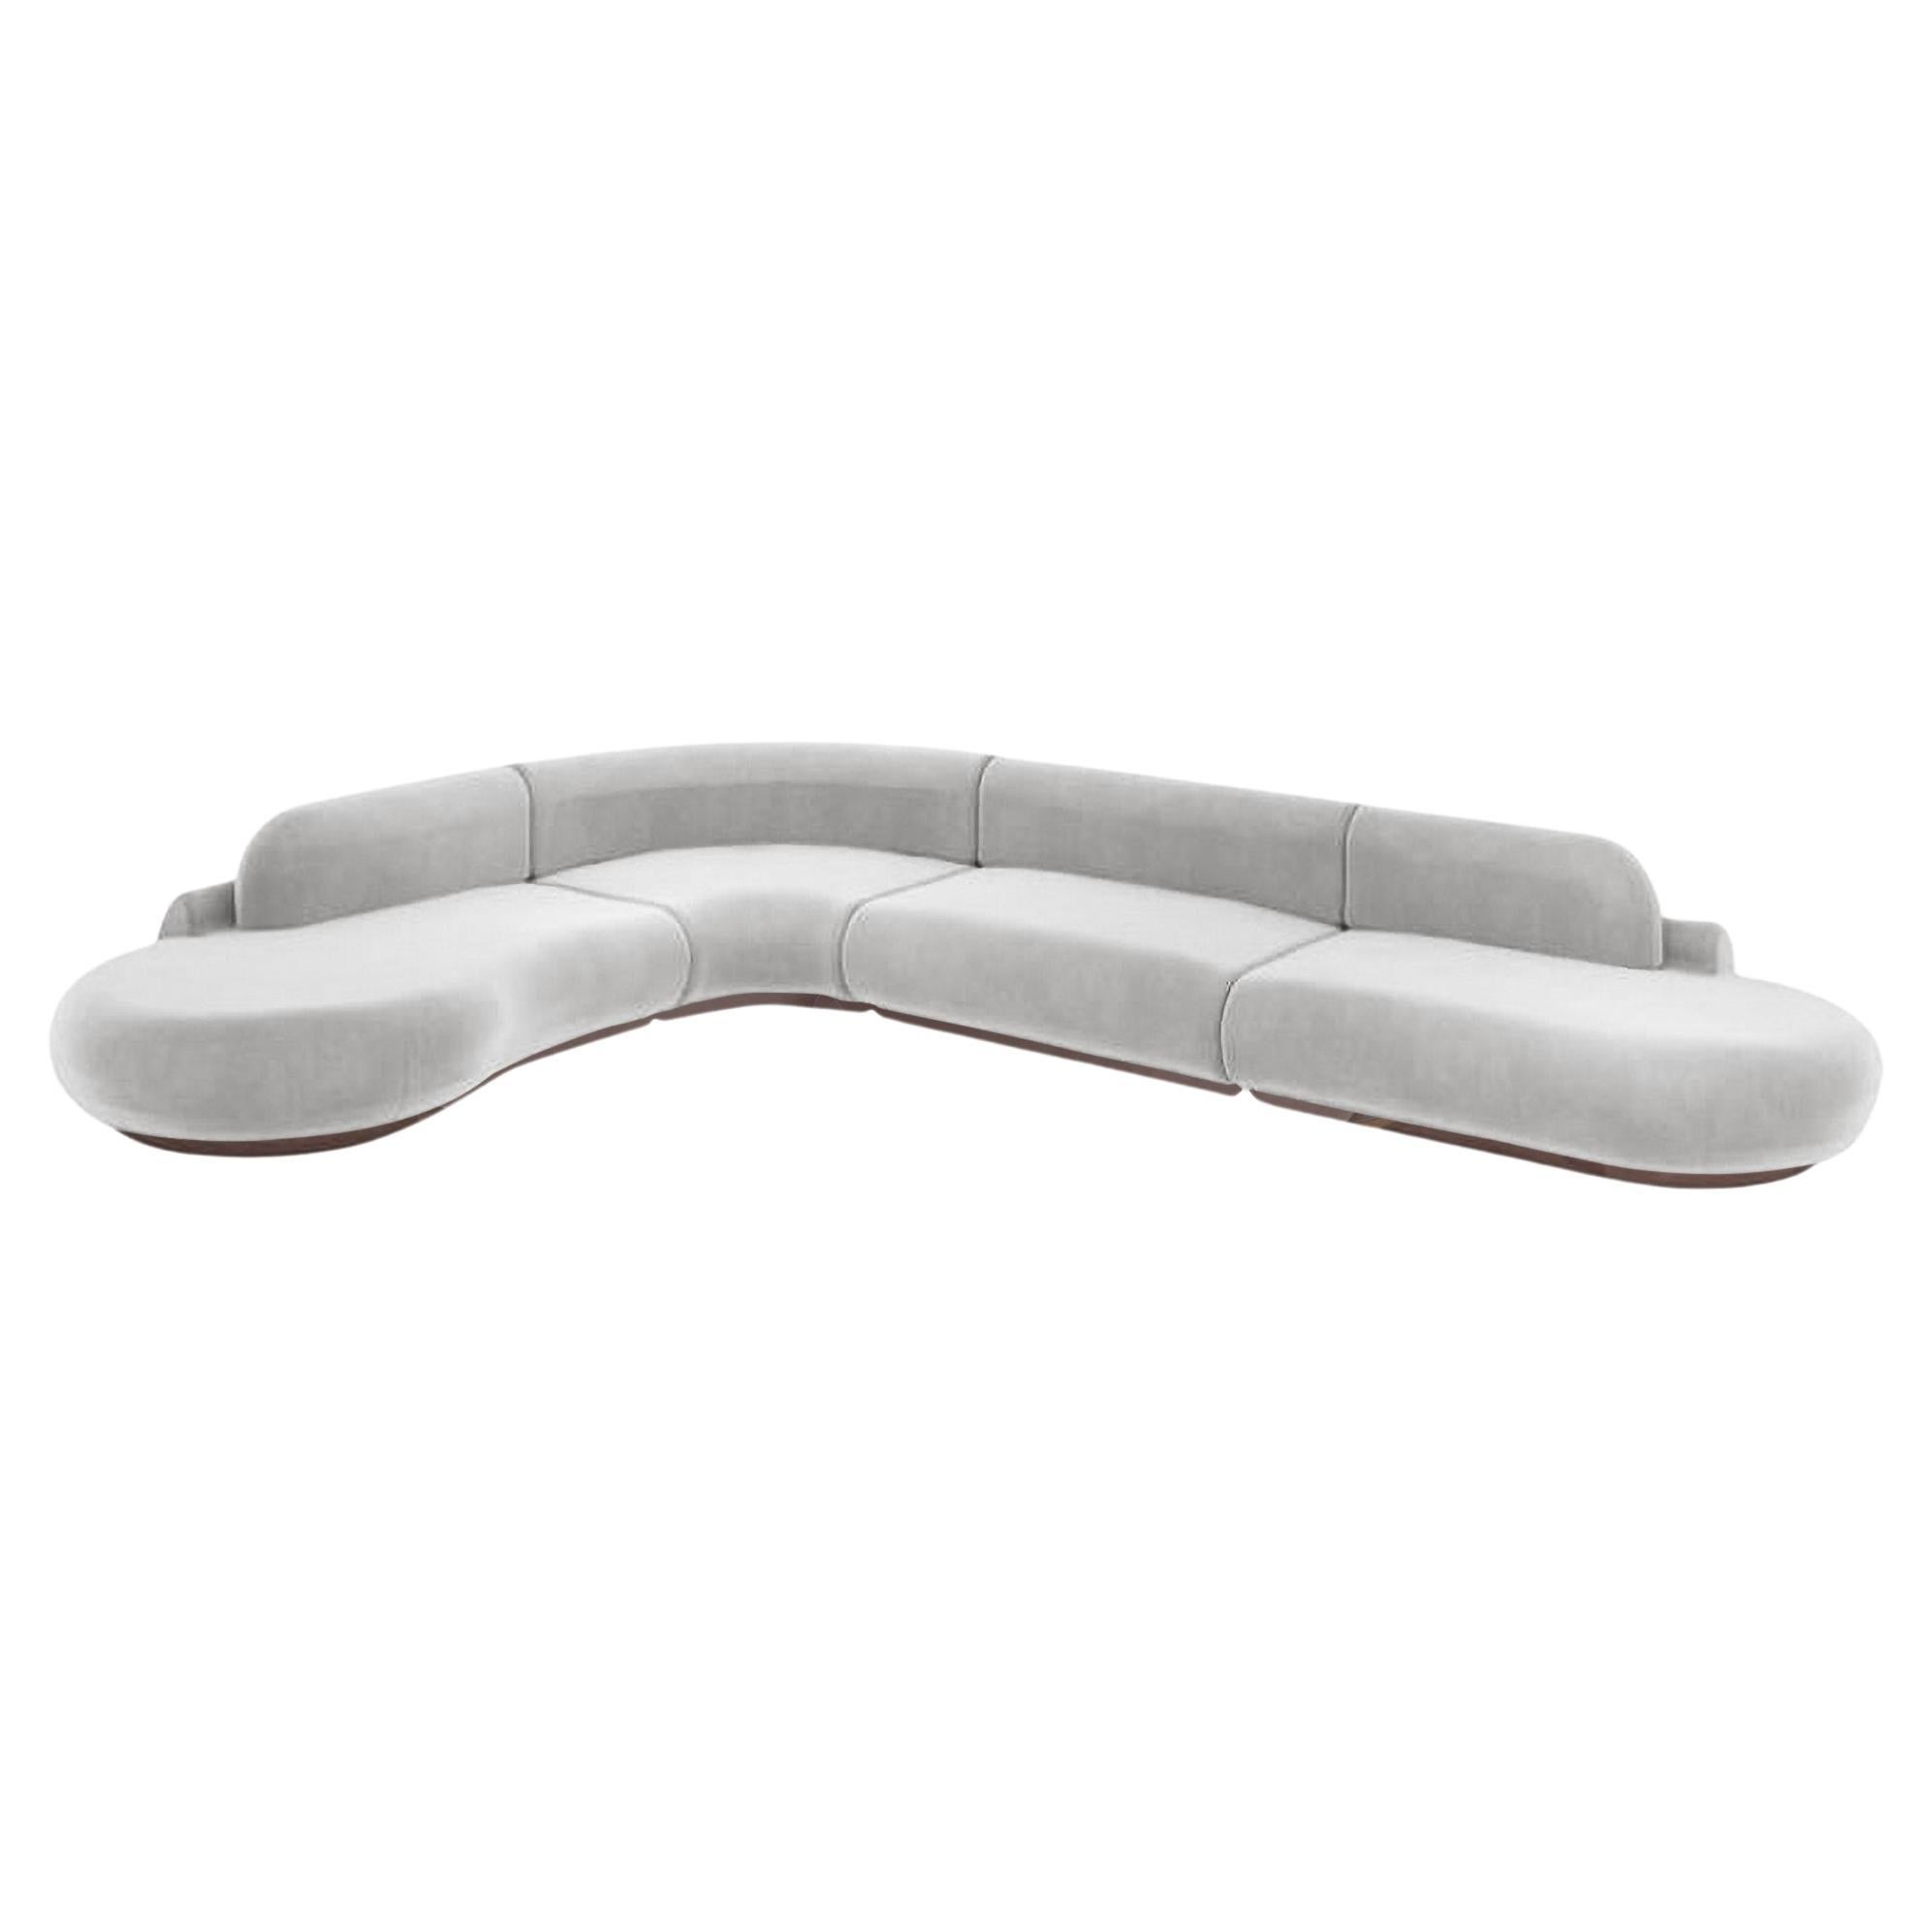 Naked Curved Sectional Sofa, 4 Piece with Beech Ash-056-1 and Aluminum For Sale